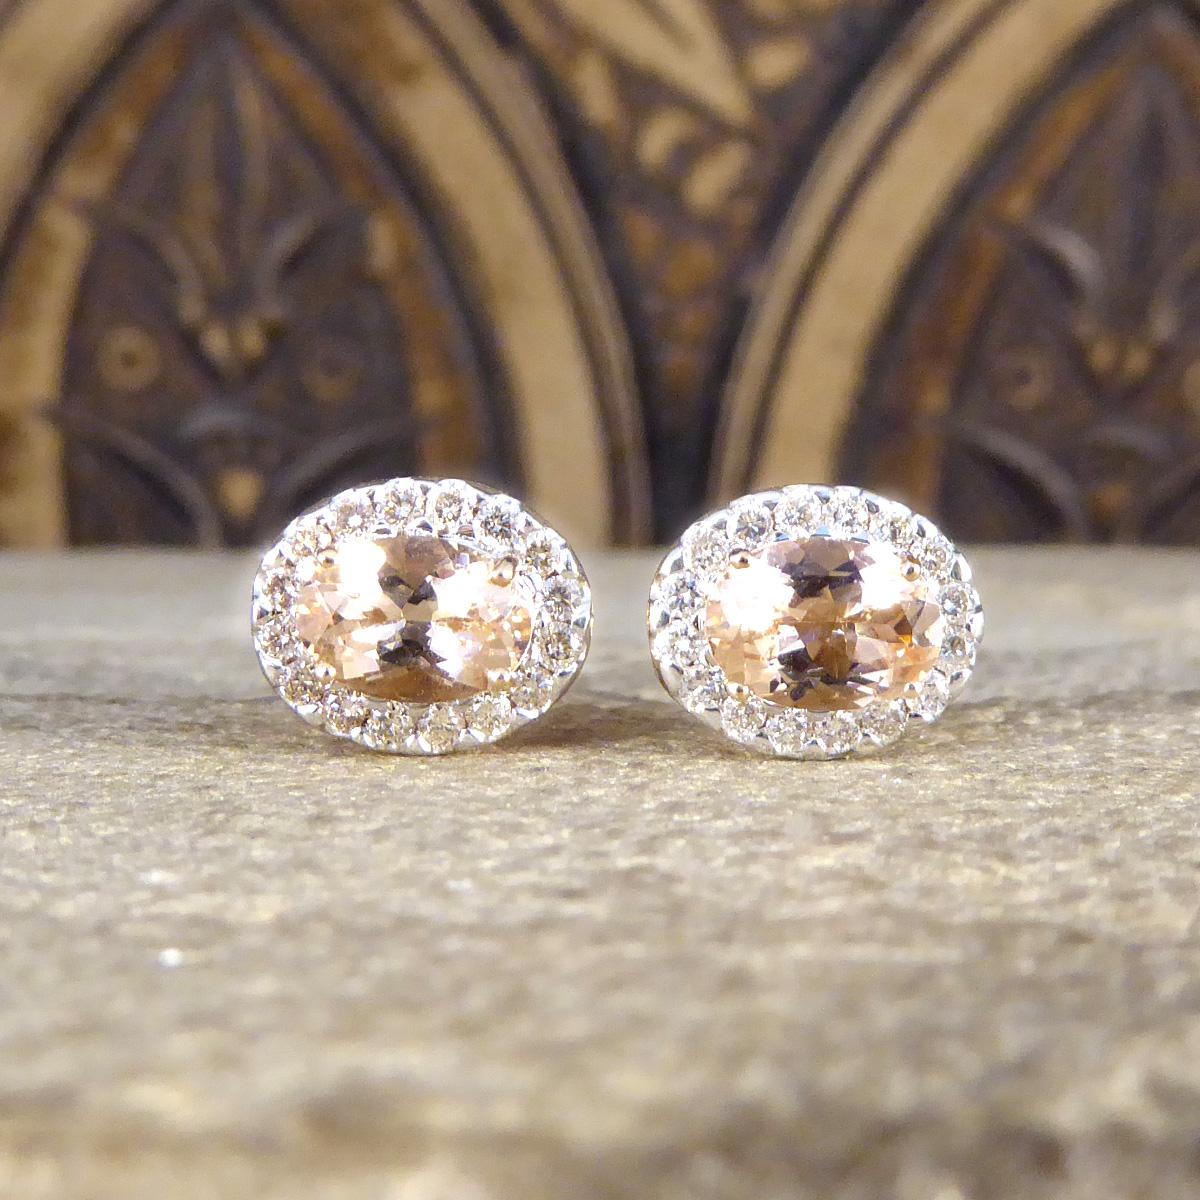 A perfect pair of pink and sparkly cluster earrings. These beautifully romantic earrings each hold Morganite with a lovely pink hue in a four claw setting. They both have a surround of 16 smaller brilliant cut Diamonds that have a warm feel to